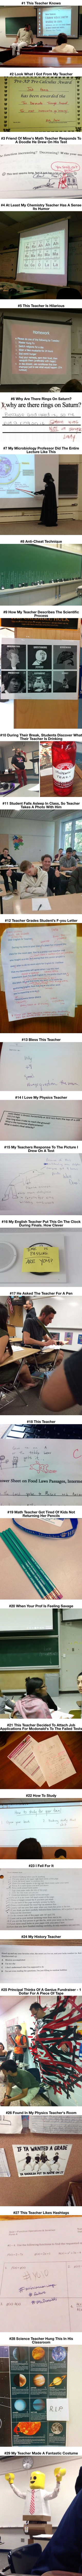 awesome-teachers-compilation